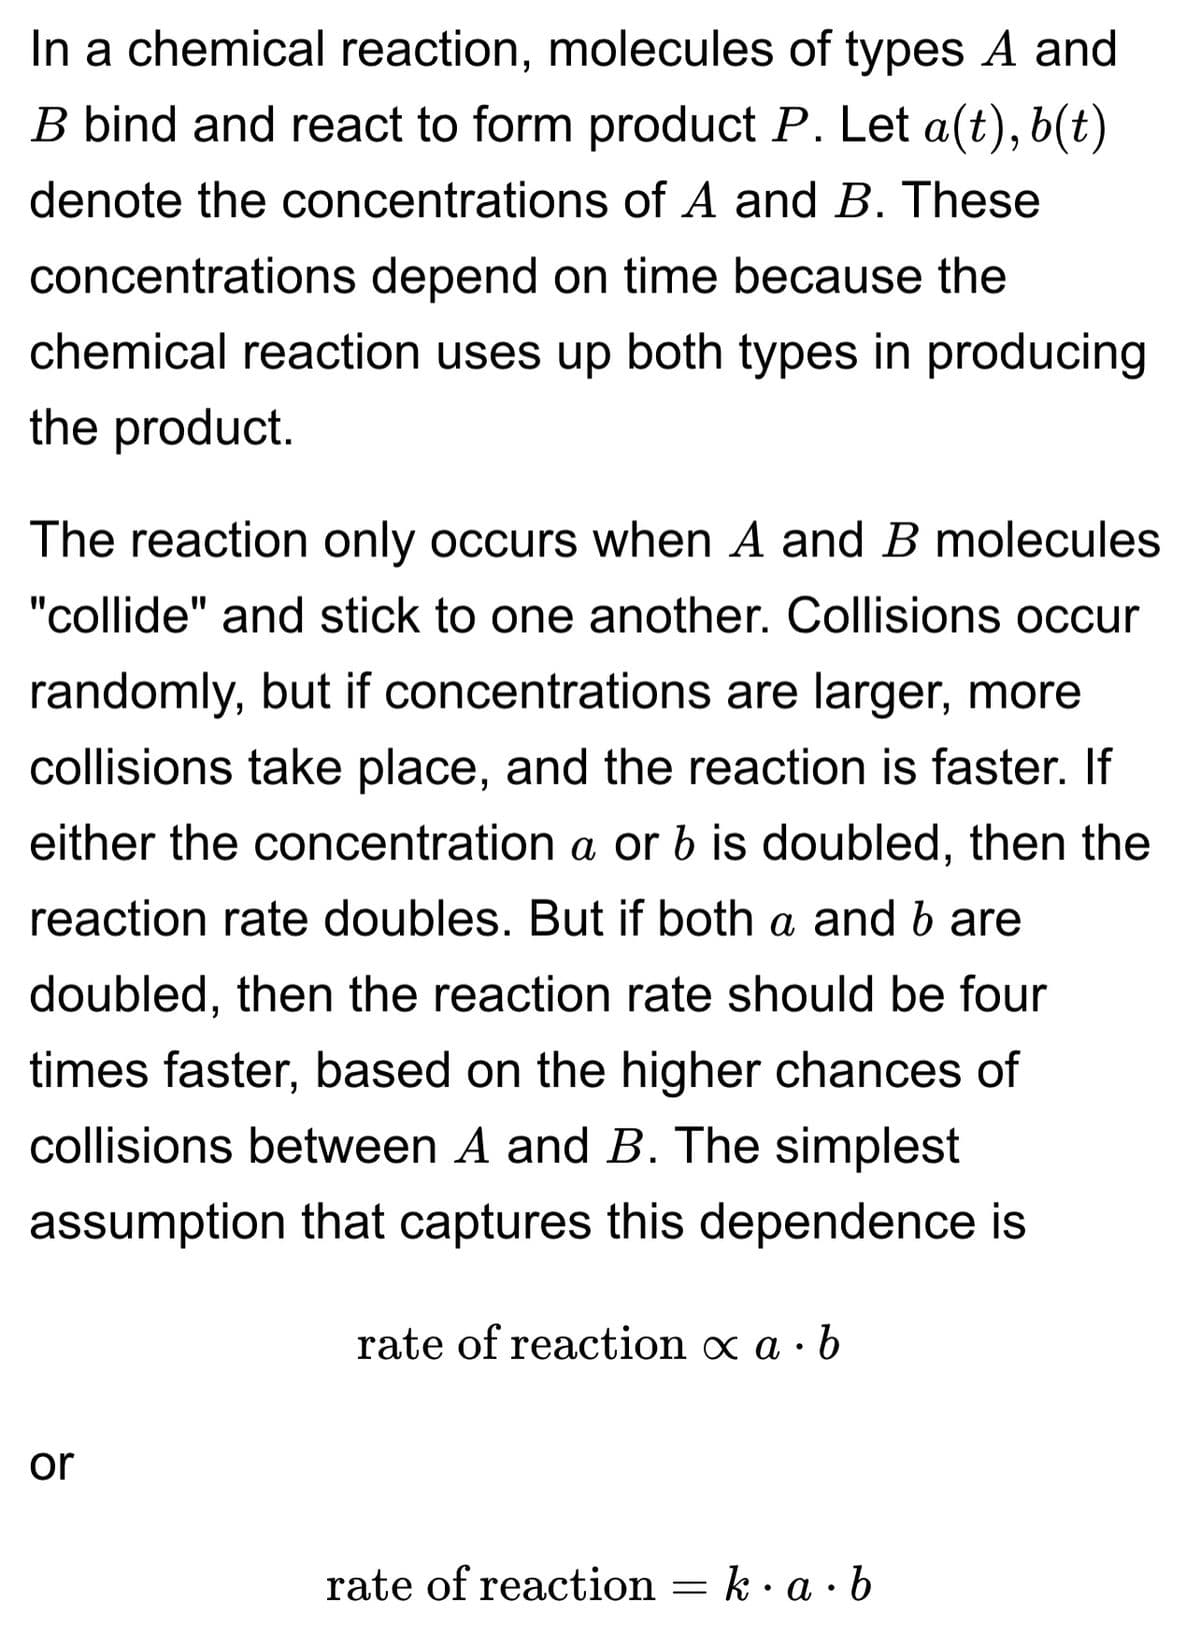 In a chemical reaction, molecules of types A and
B bind and react to form product P. Let a(t), b(t)
denote the concentrations of A and B. These
concentrations depend on time because the
chemical reaction uses up both types in producing
the product.
The reaction only occurs when A and B molecules
"collide" and stick to one another. Collisions occur
randomly, but if concentrations are larger, more
collisions take place, and the reaction is faster. If
either the concentration a or b is doubled, then the
reaction rate doubles. But if both a and b are
doubled, then the reaction rate should be four
times faster, based on the higher chances of
collisions between A and B. The simplest
assumption that captures this dependence is
or
rate of reaction x a. b
rate of reaction =
k.a.b